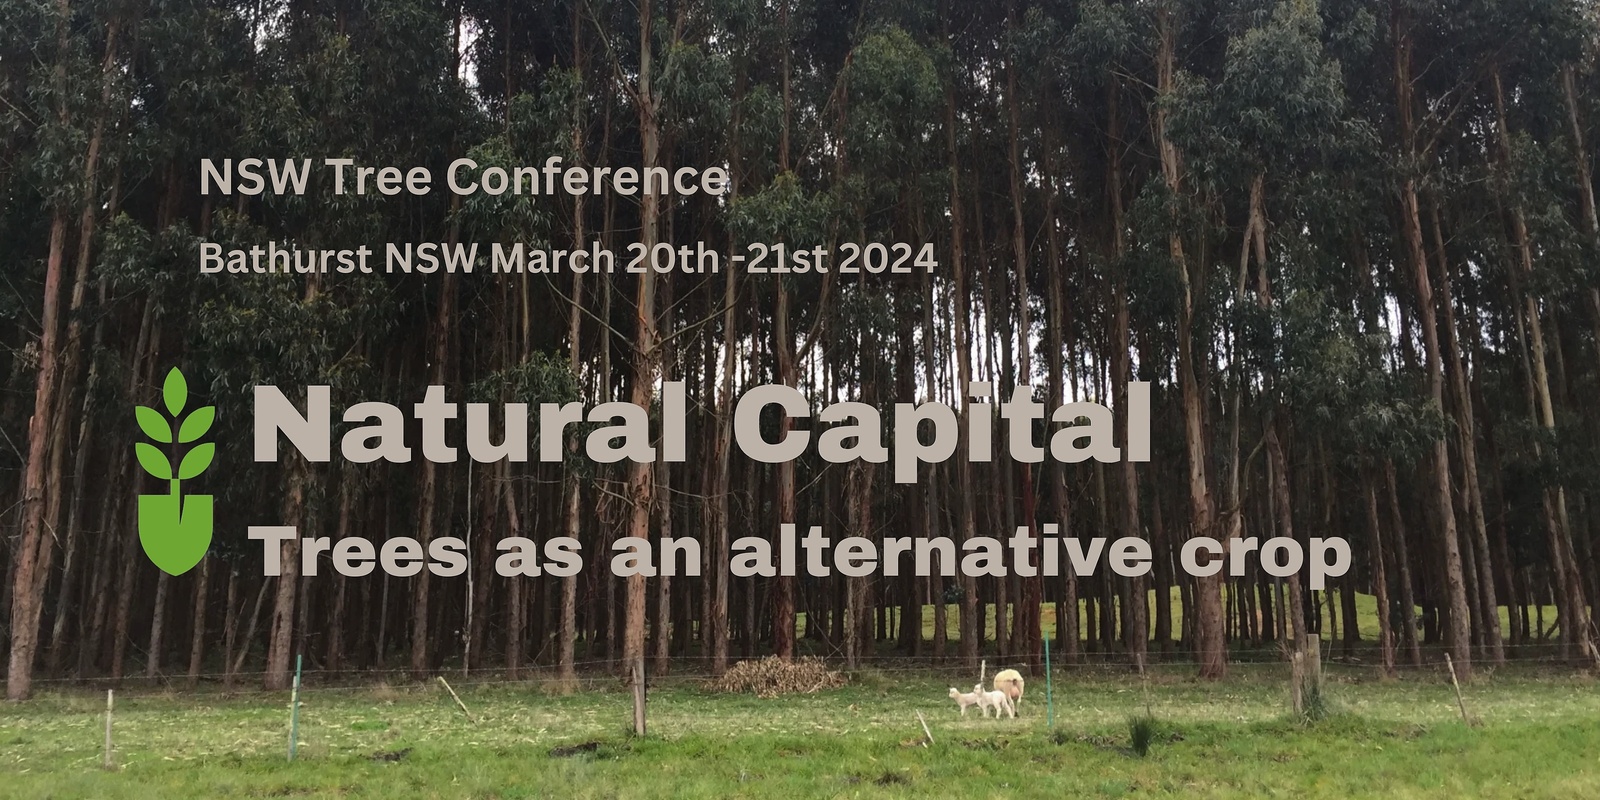 Banner image for NSW Tree Conference 2024 - "Natural Capital: Trees as an Alternative Crop"